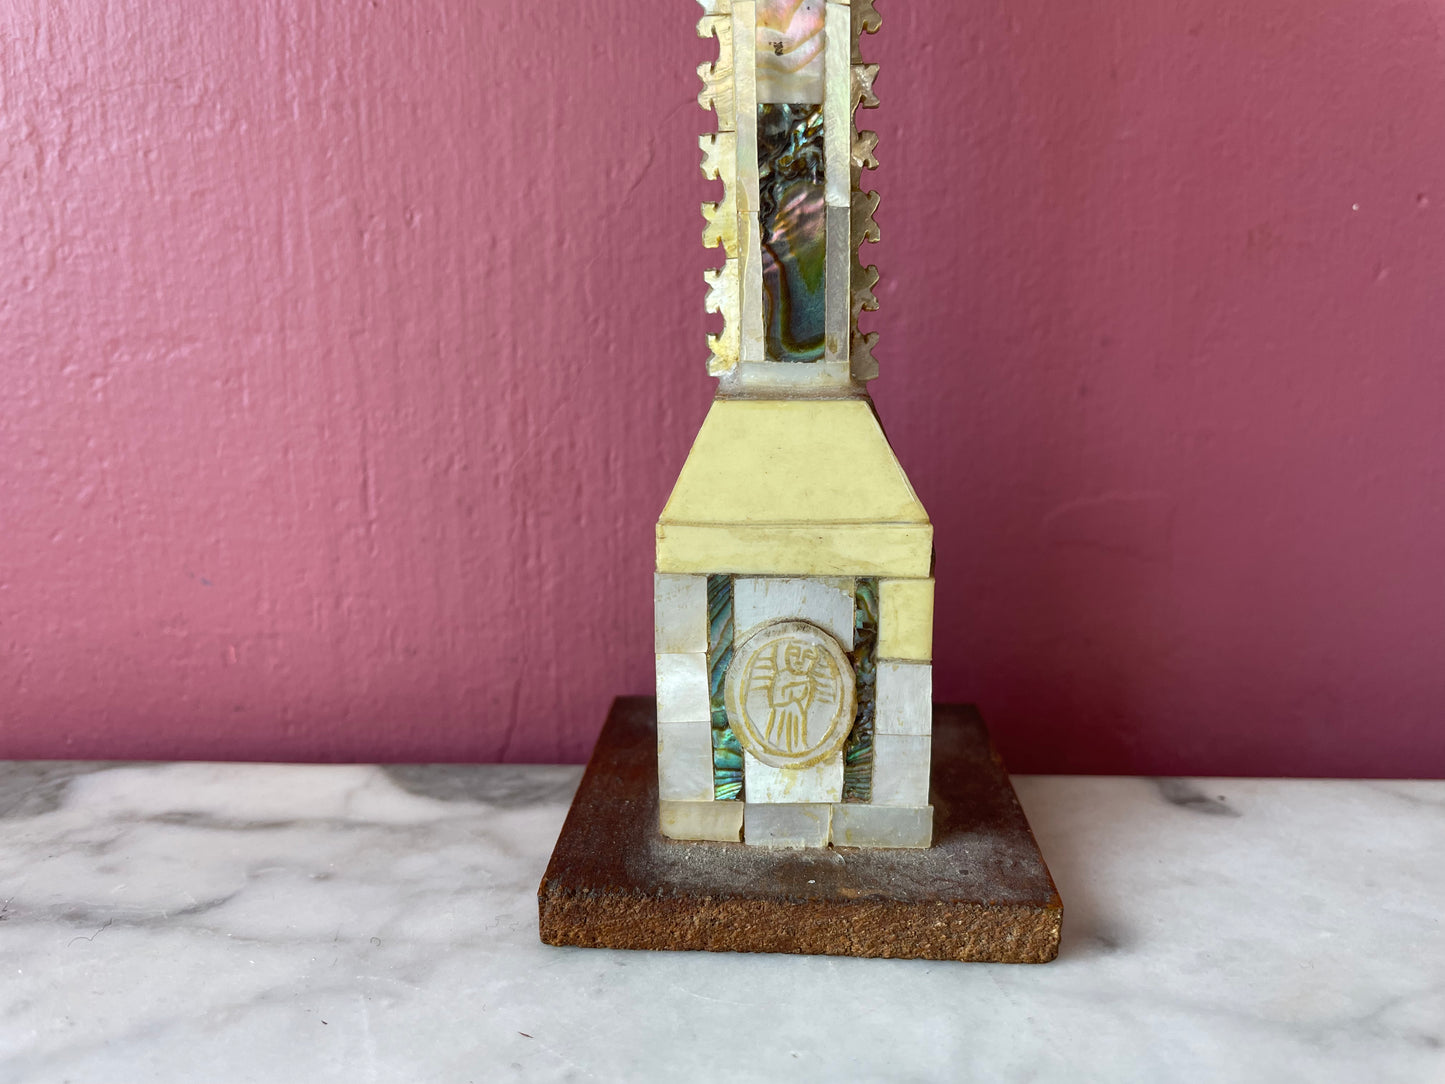 Antique Mother of Pearl Crucifix